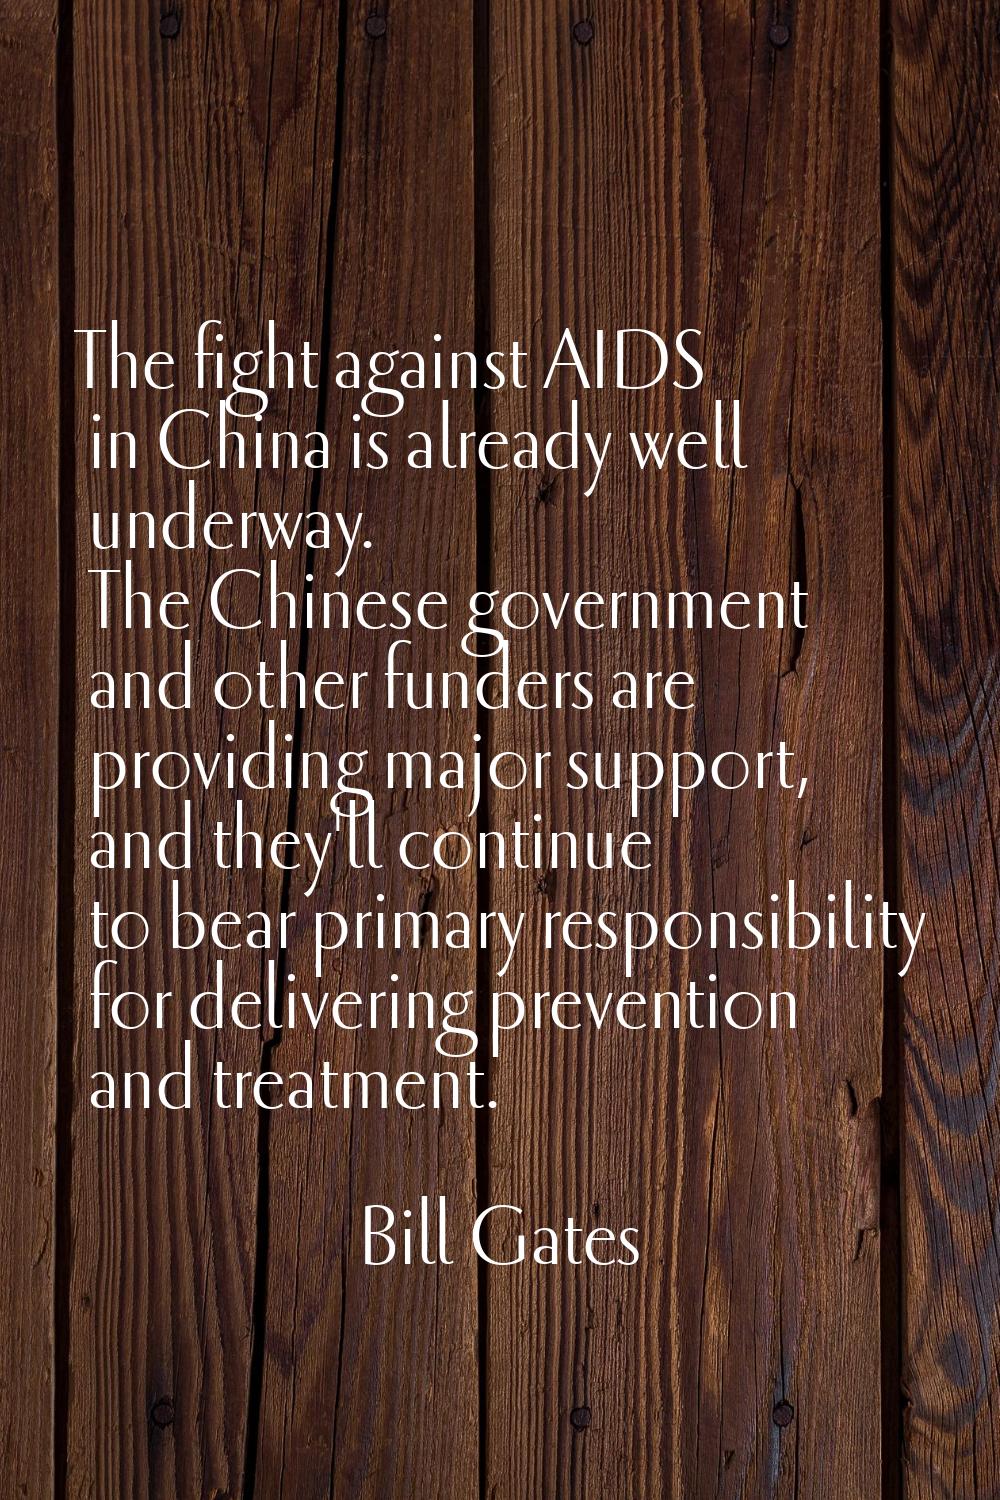 The fight against AIDS in China is already well underway. The Chinese government and other funders 